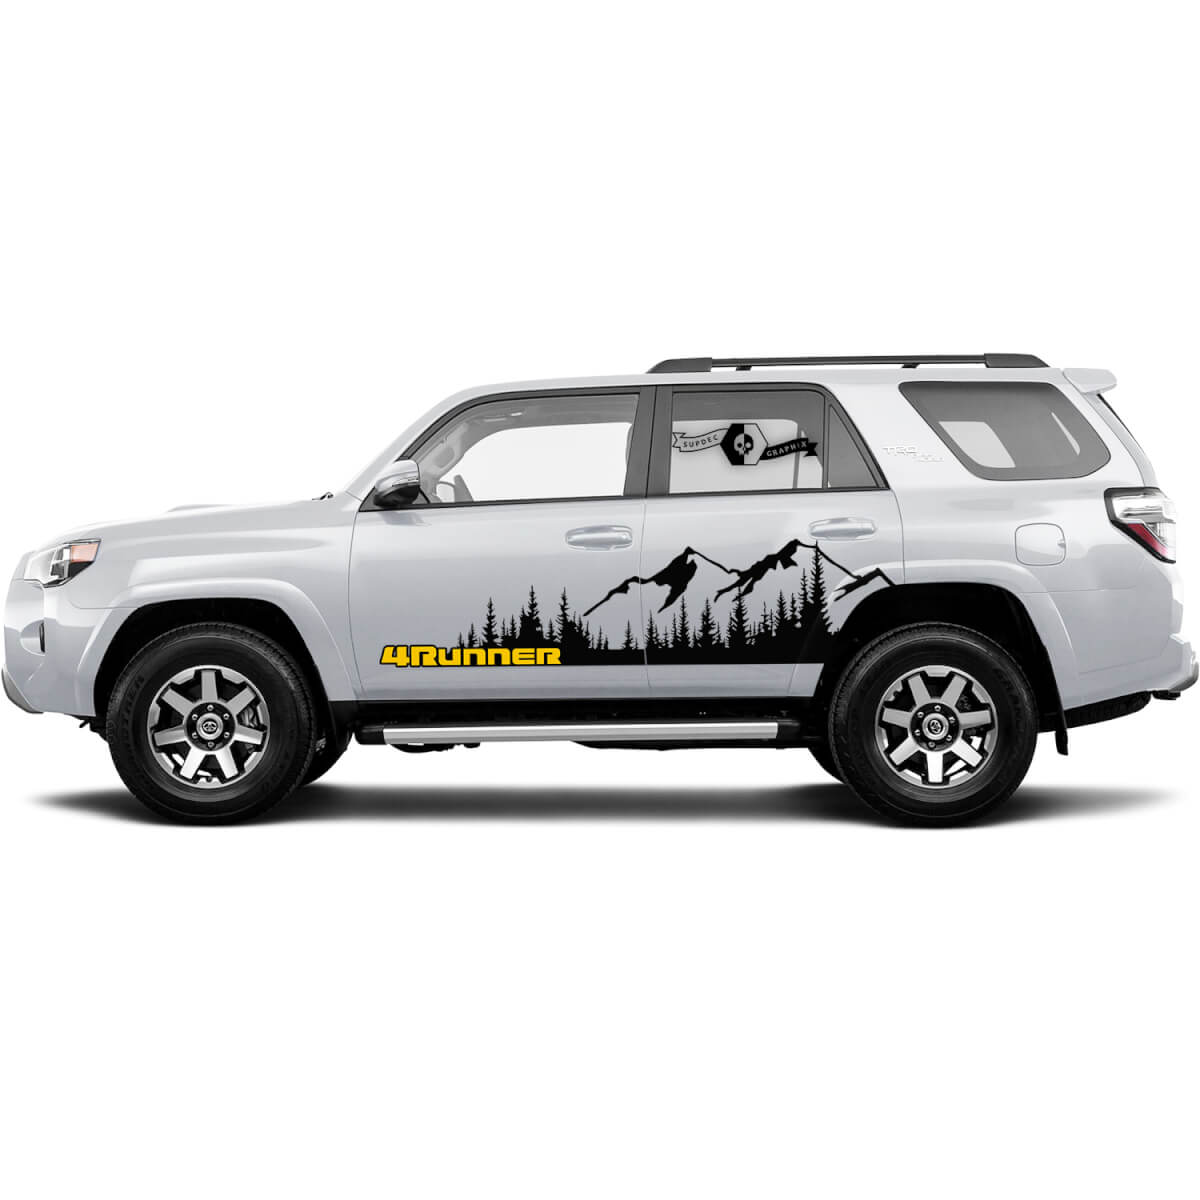 2x Two Colors 4Runner Side Doors Vinyl Mountains Forest Decals WRAP Stickers for Toyota 4Runner TRD 